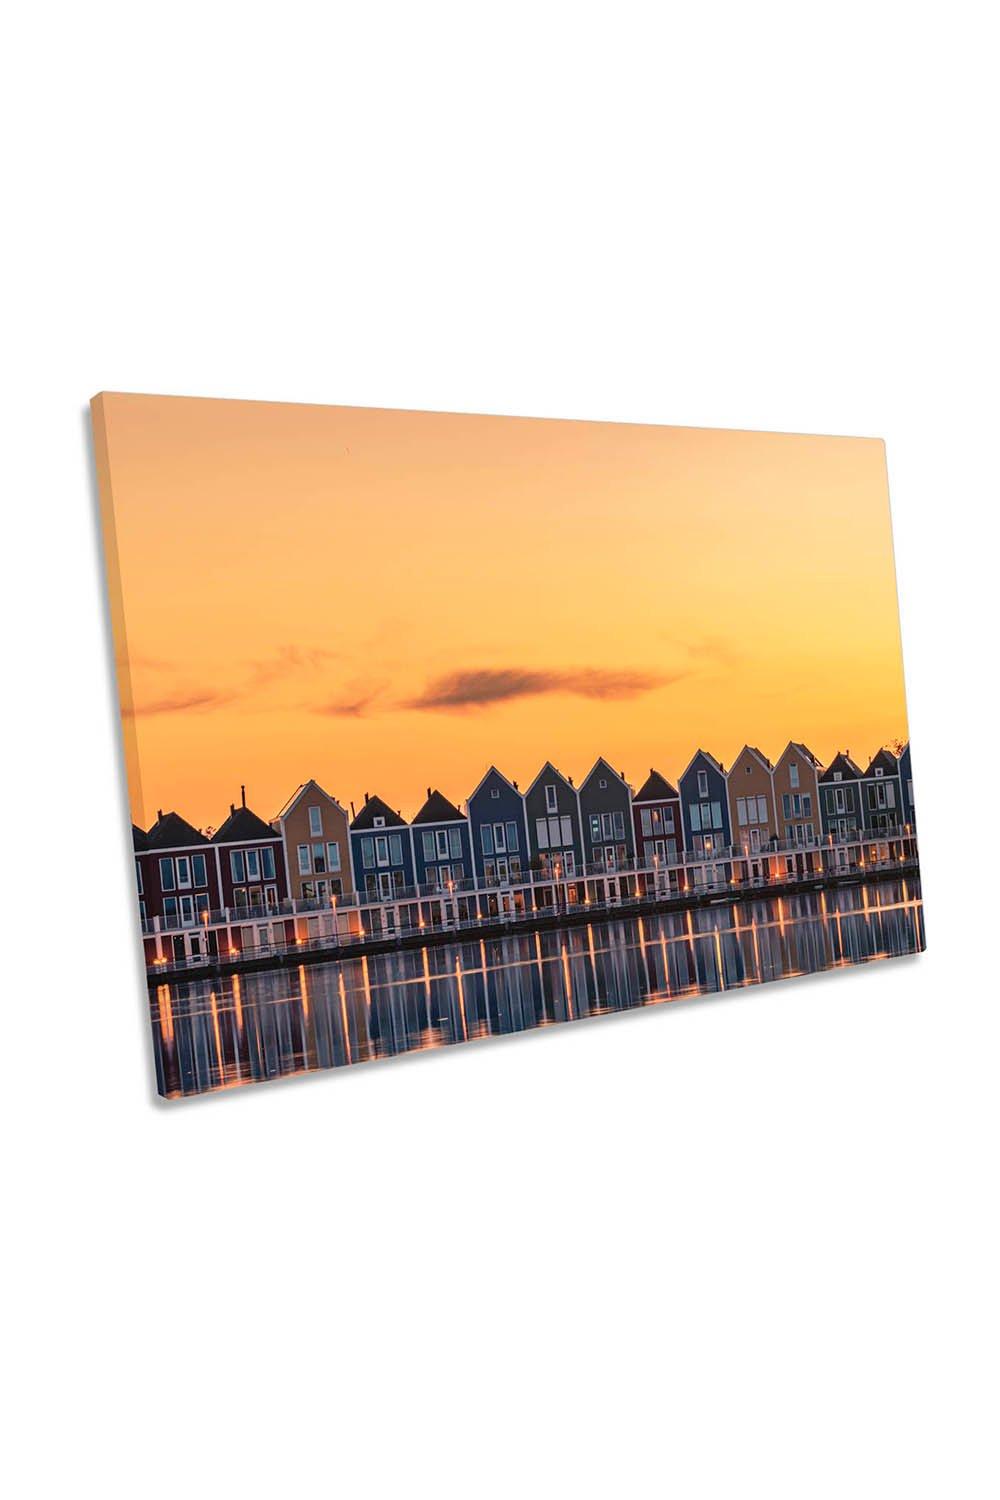 Fragile like a Feather Sunset Netherland House Canvas Wall Art Picture Print